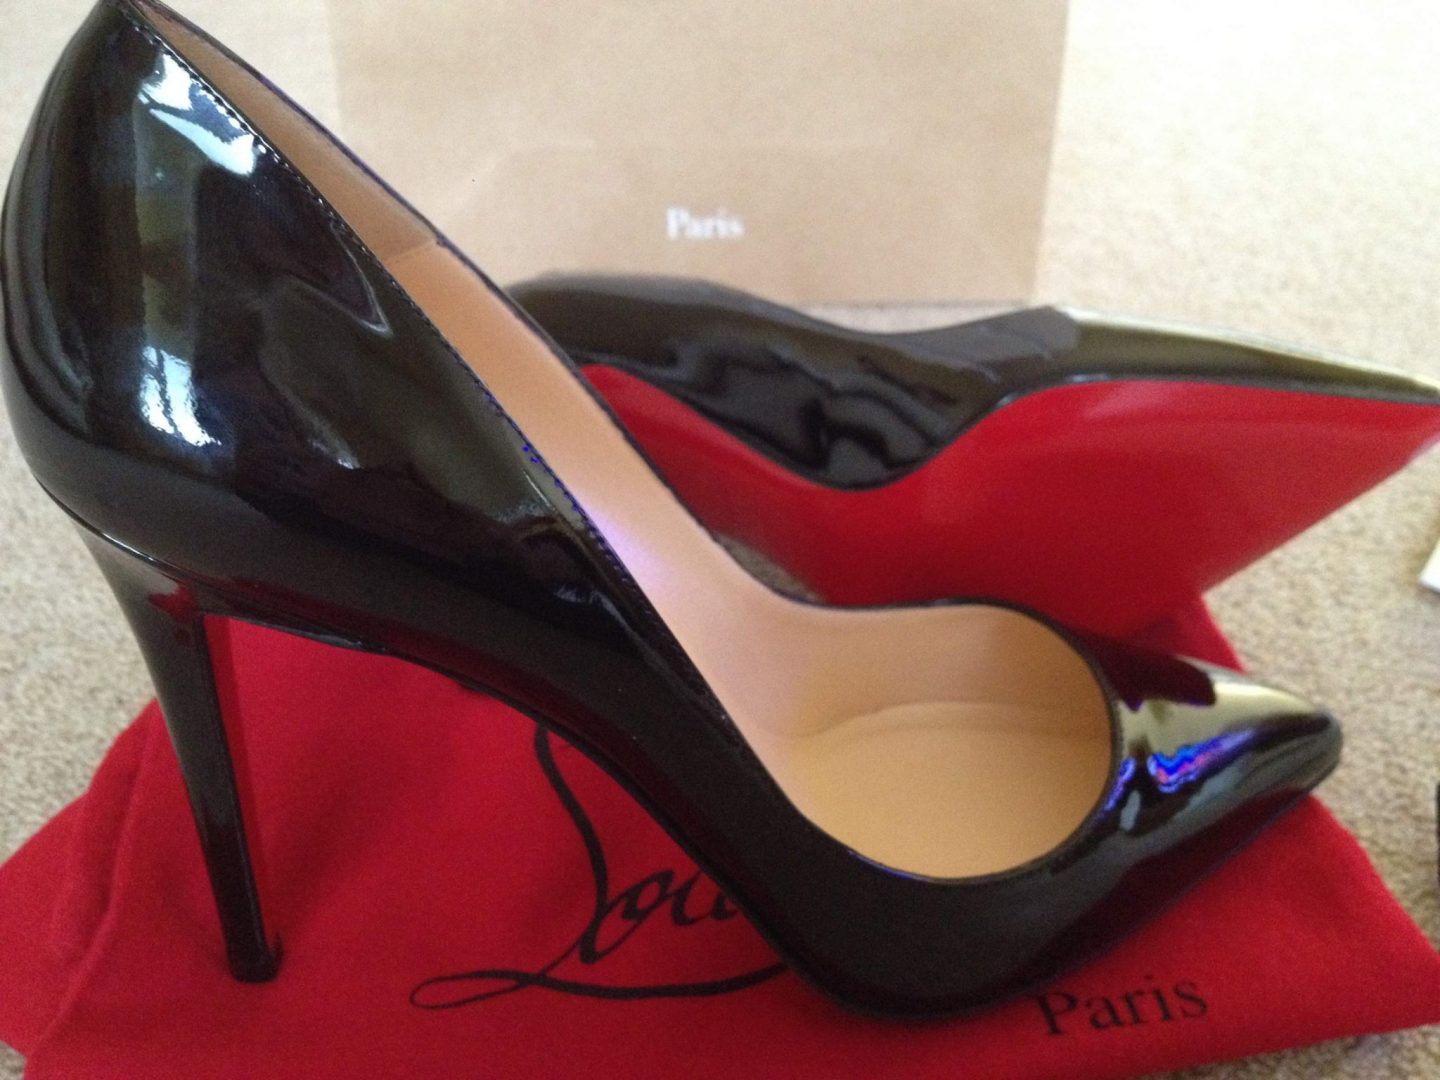 Buying Louboutins: Christian Louboutin Pigalle 100 Black Patent Leather